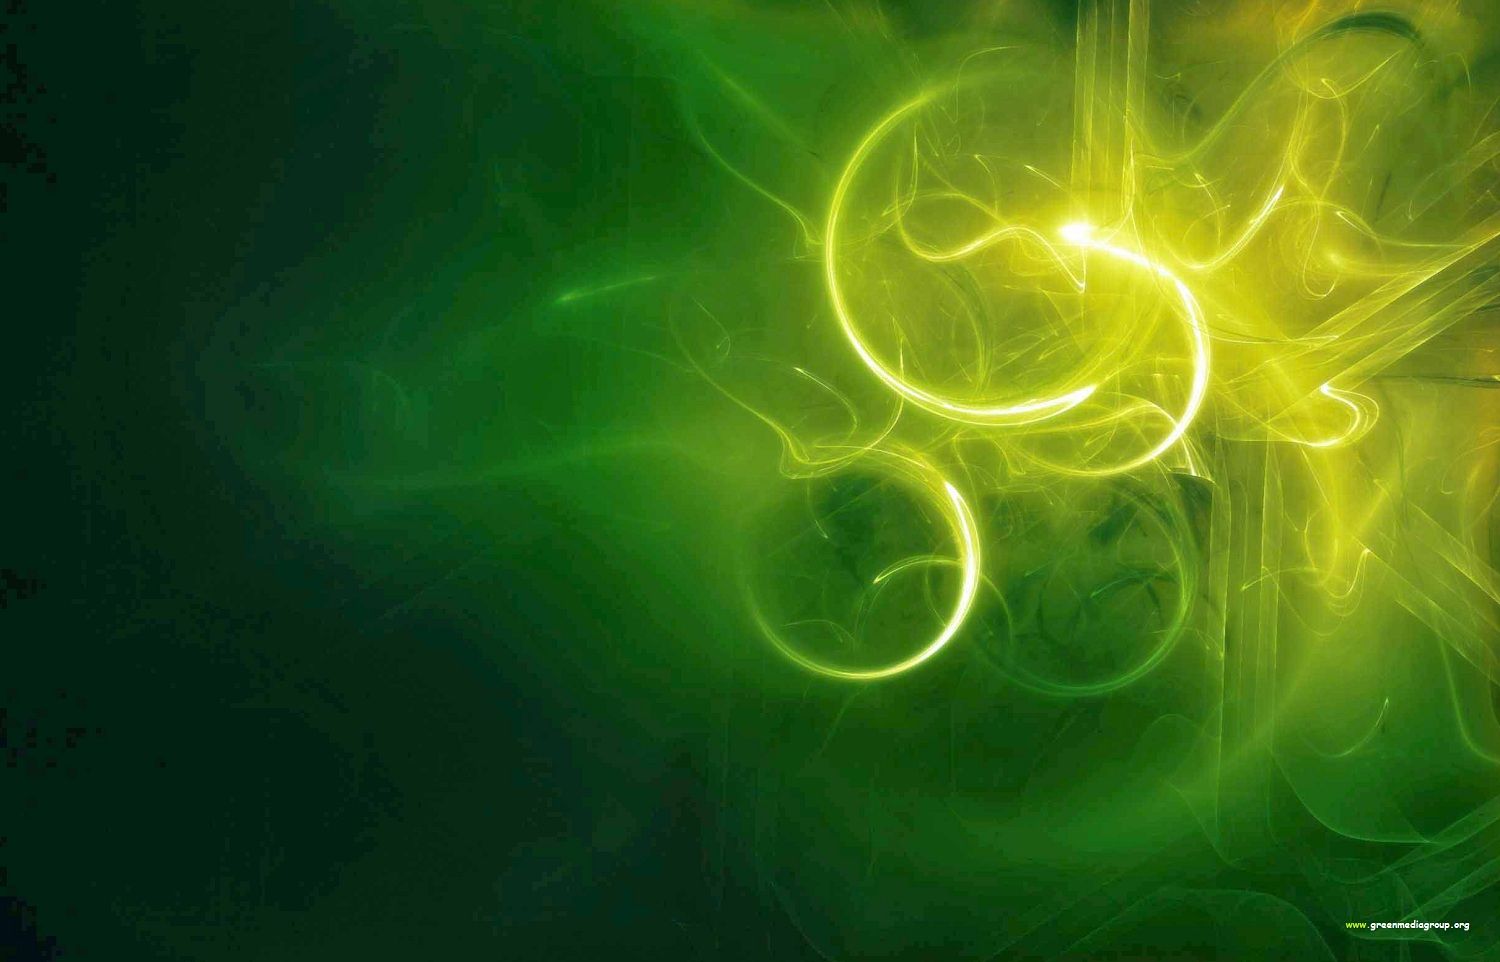 green and gold backgrounds